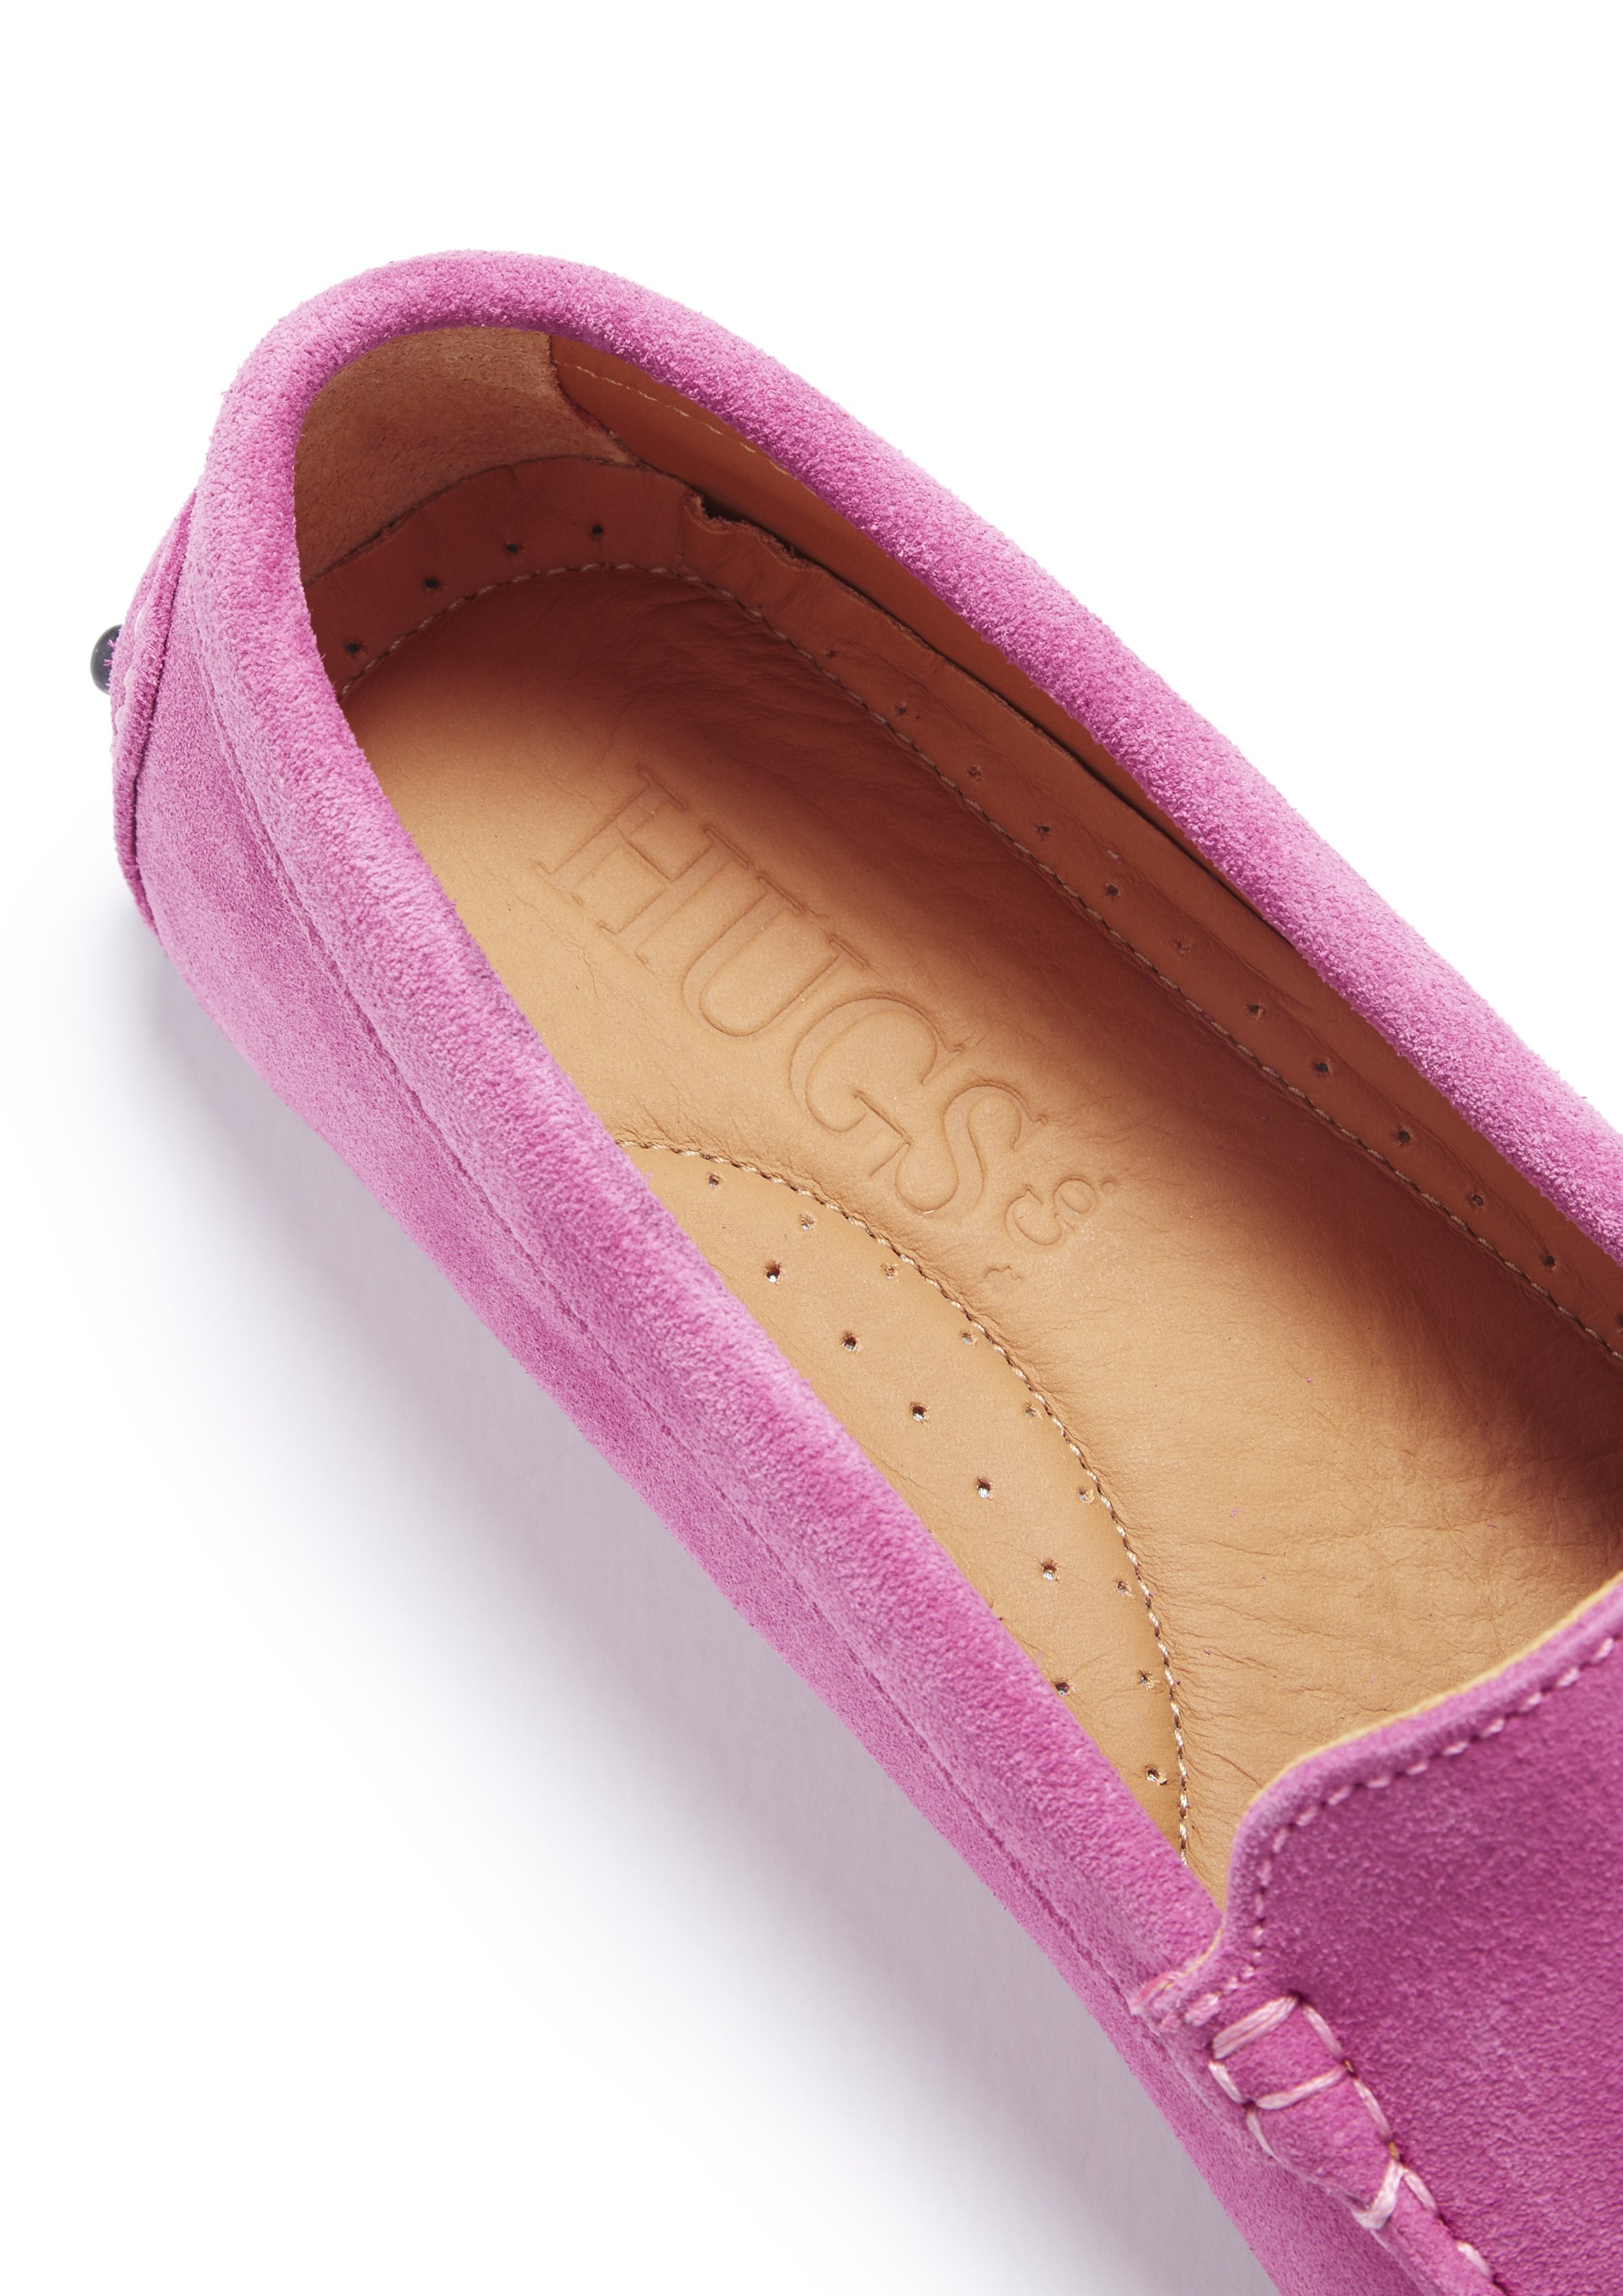 pink suede loafers womens